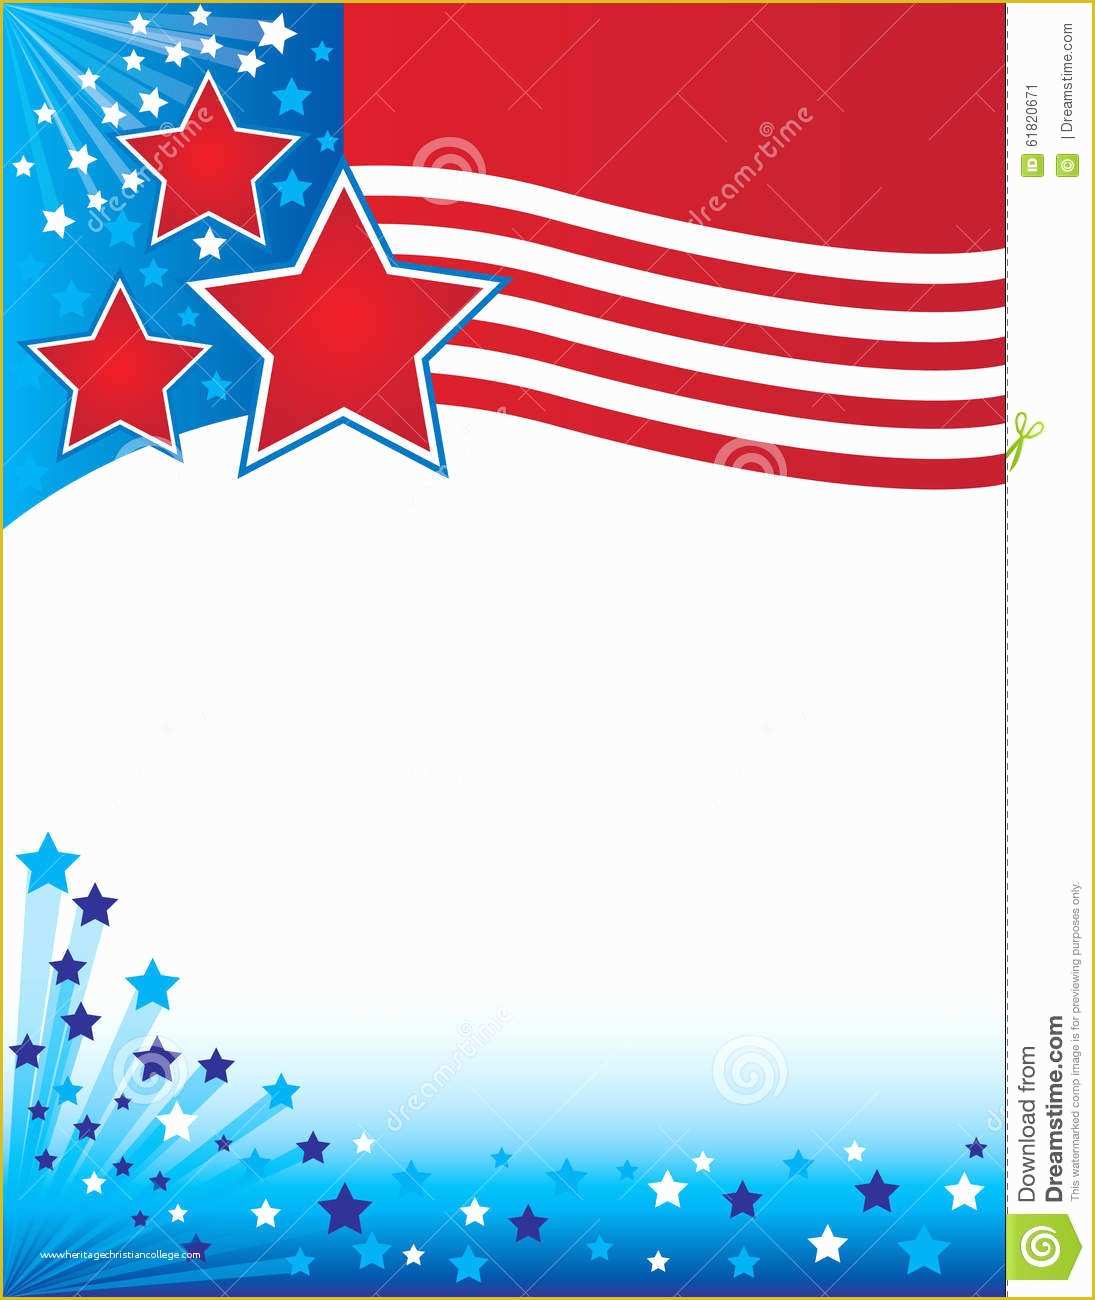 Free American Flag Flyer Template Of Patriotic Flyers Background Stock Illustration Image